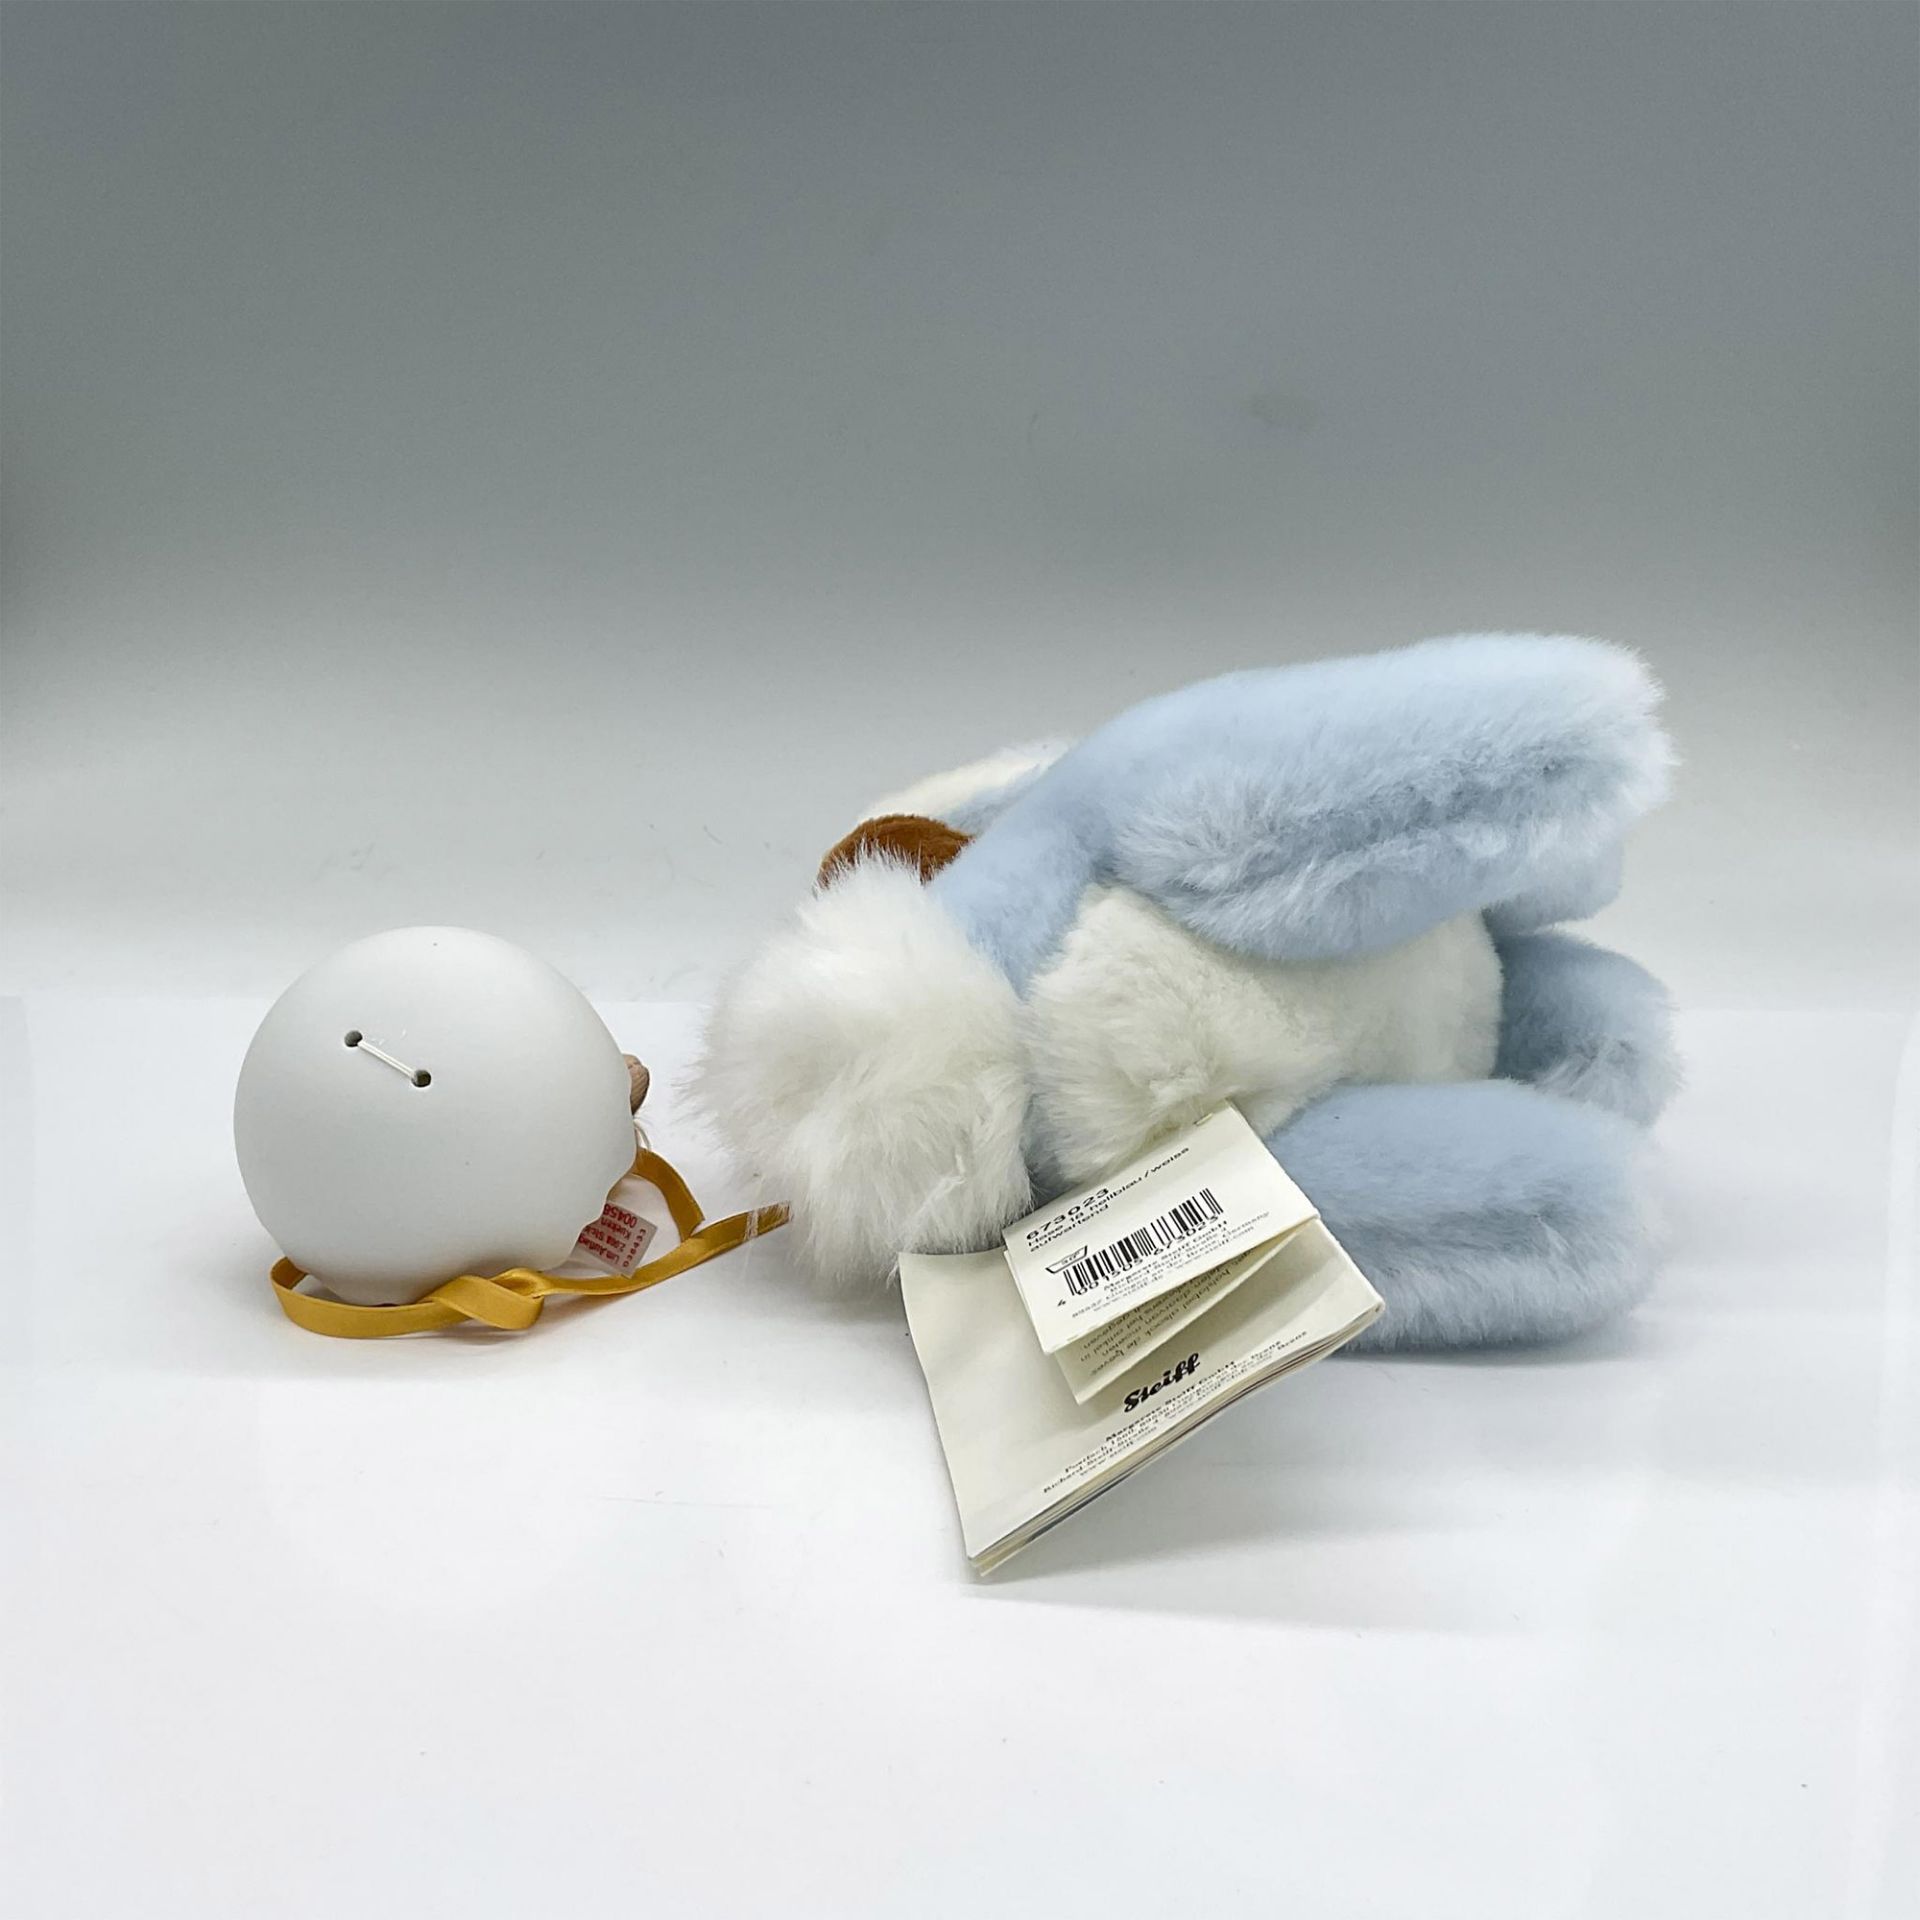 2pc Steiff Chick in Egg Ornament + Plush Blue Bunny - Image 4 of 5